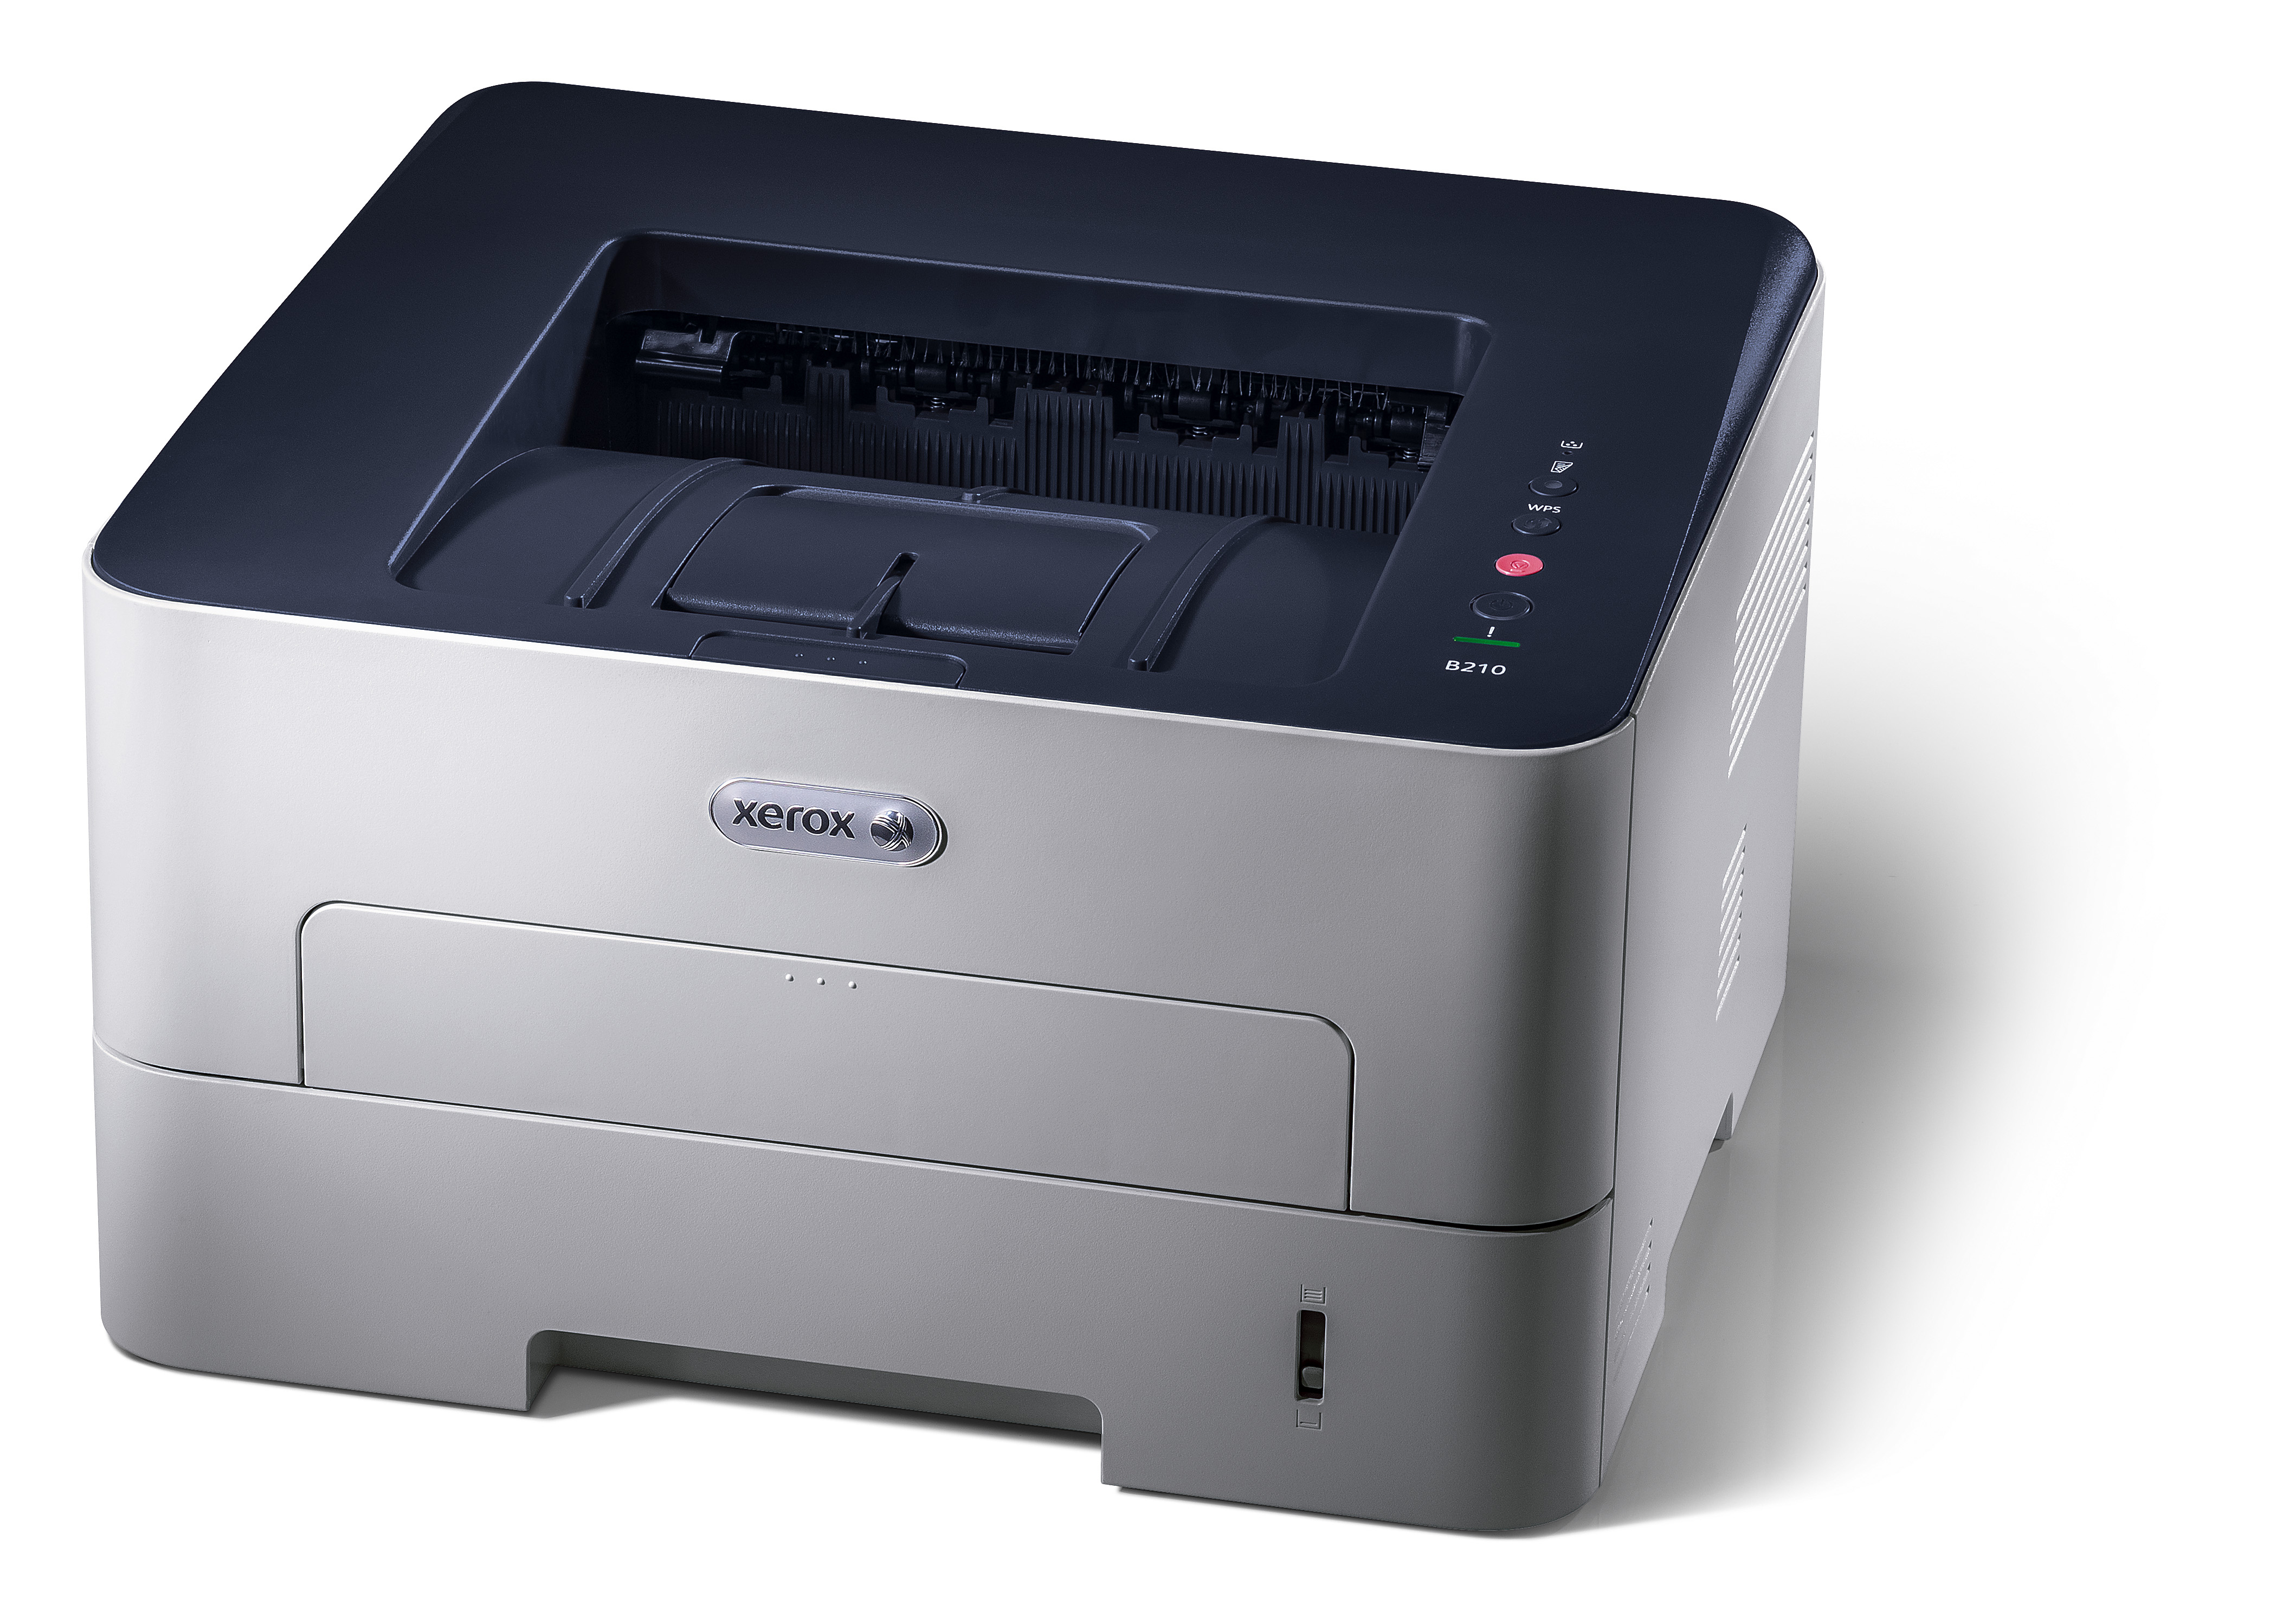 Xerox Color print Suit Compact Multifunction Printer with WiFi Direct and Mobile Printing